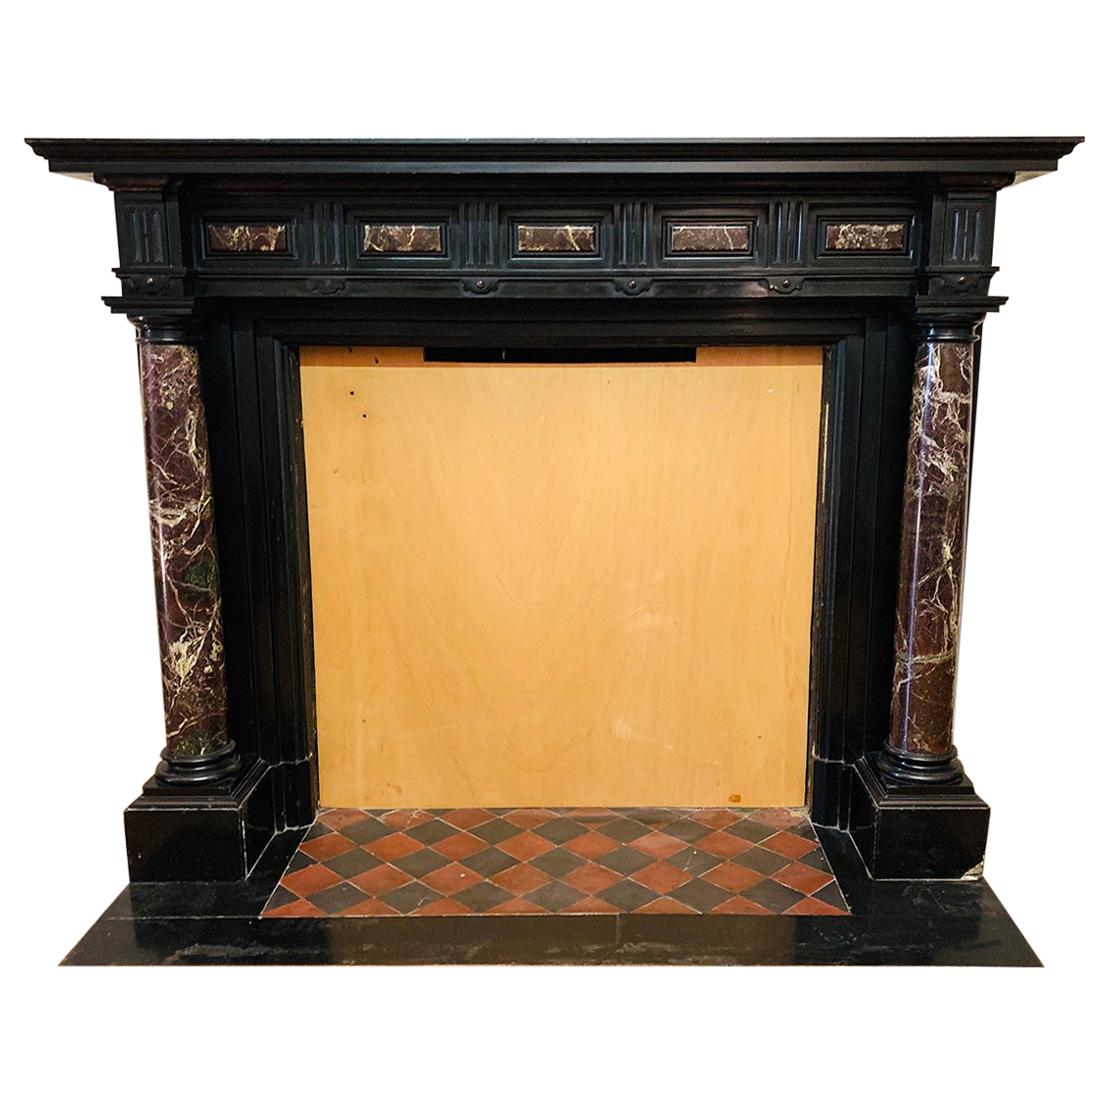 Antique 19th Century Empire Fireplace Mantel in Black and Red Marble For Sale